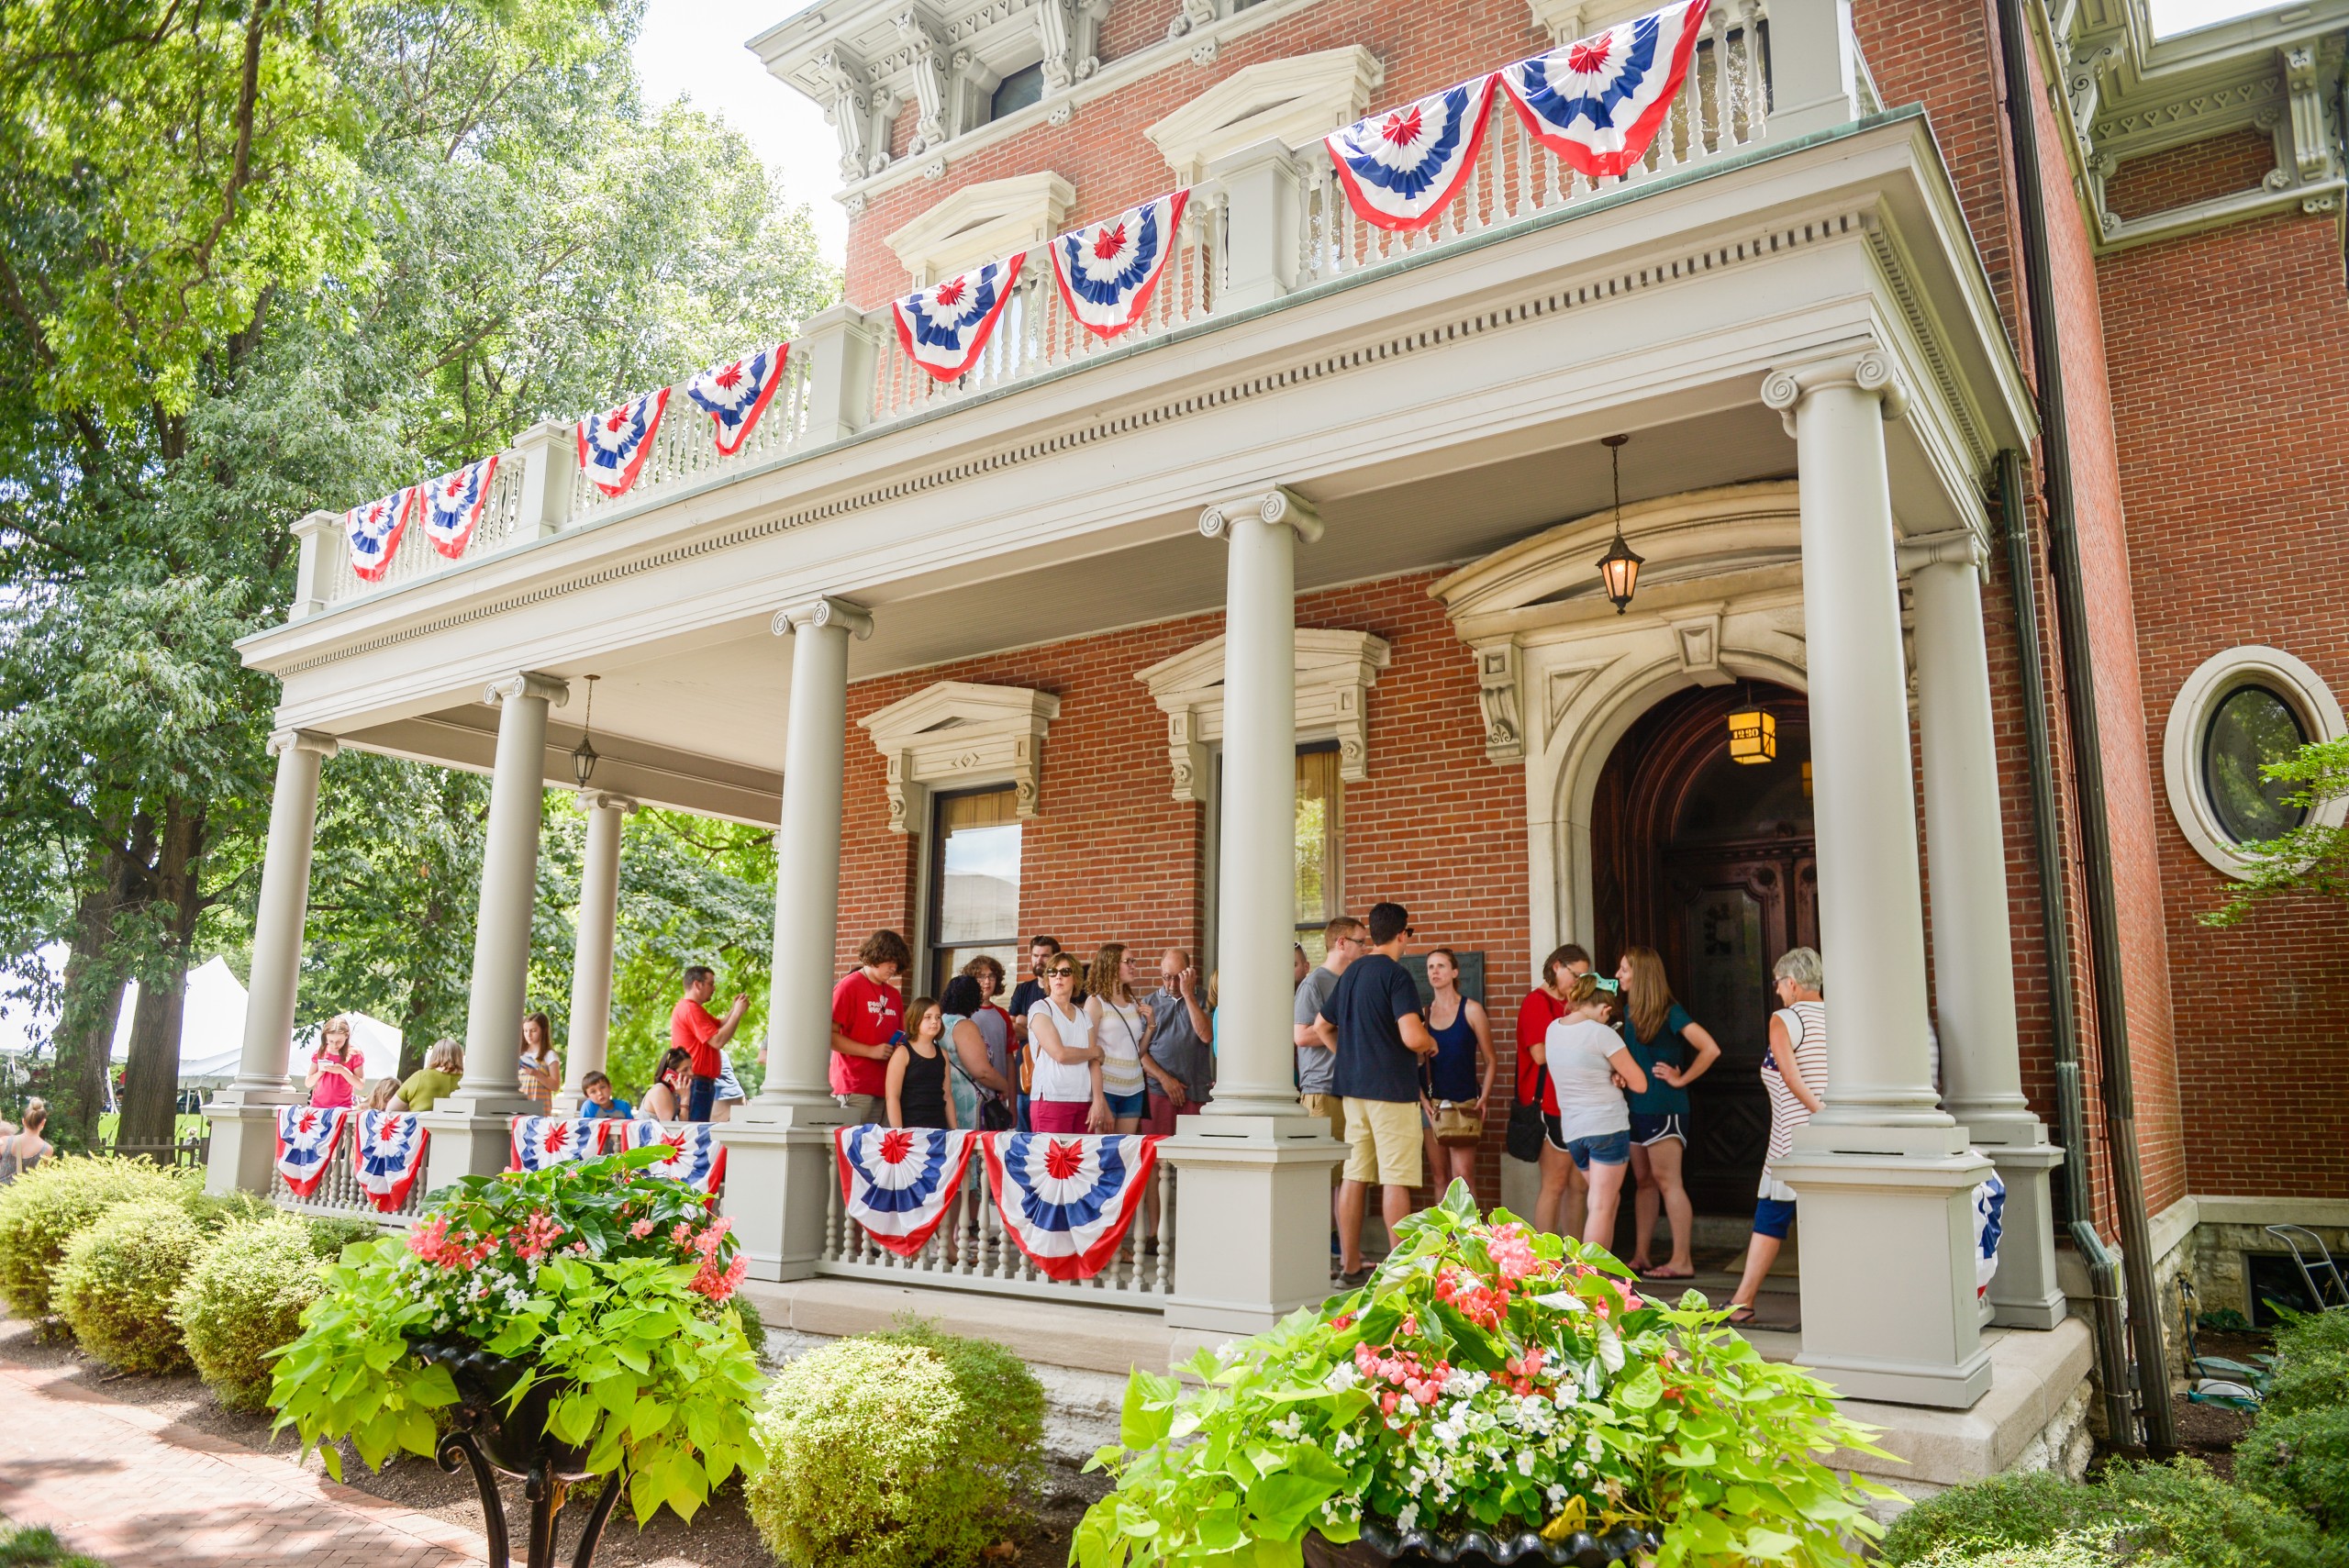 Fourth of July social decks out Benjamin Harrison site in red, white ...